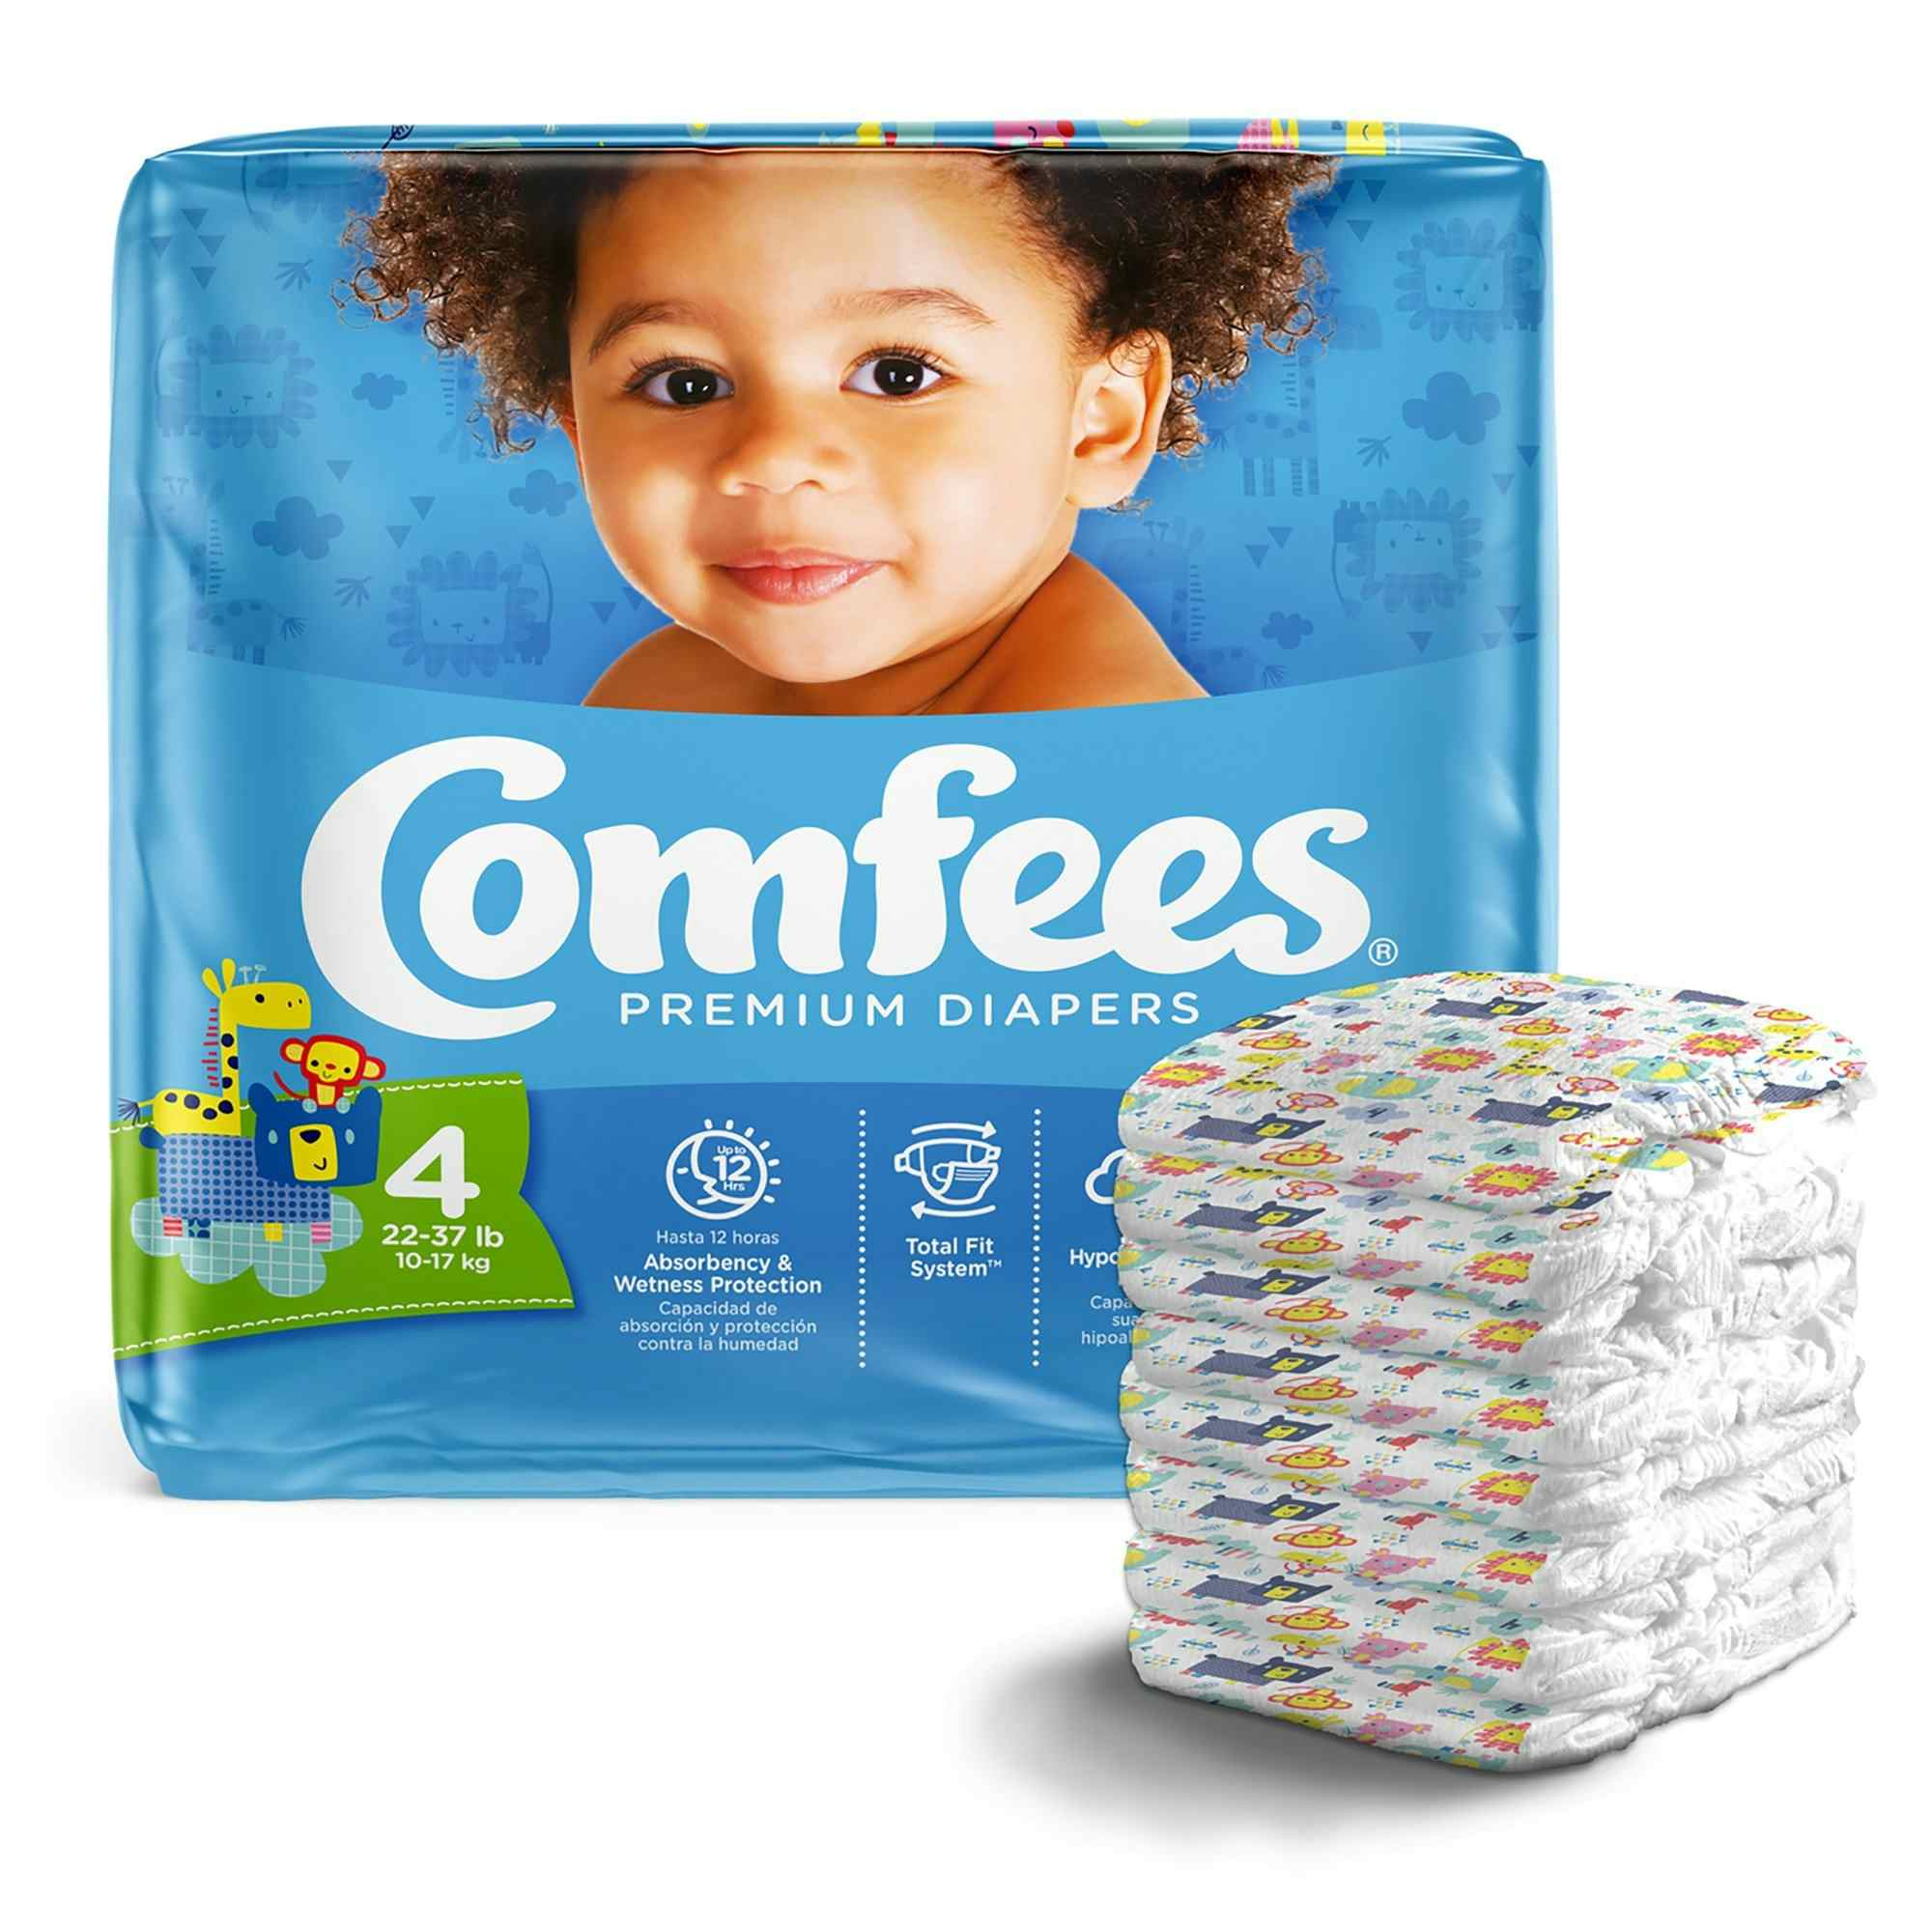 Comfees Premium Baby Diapers, Moderate Absorbency, CMF-4, Size 4 (22 - 37 lbs.) - Bag of 31